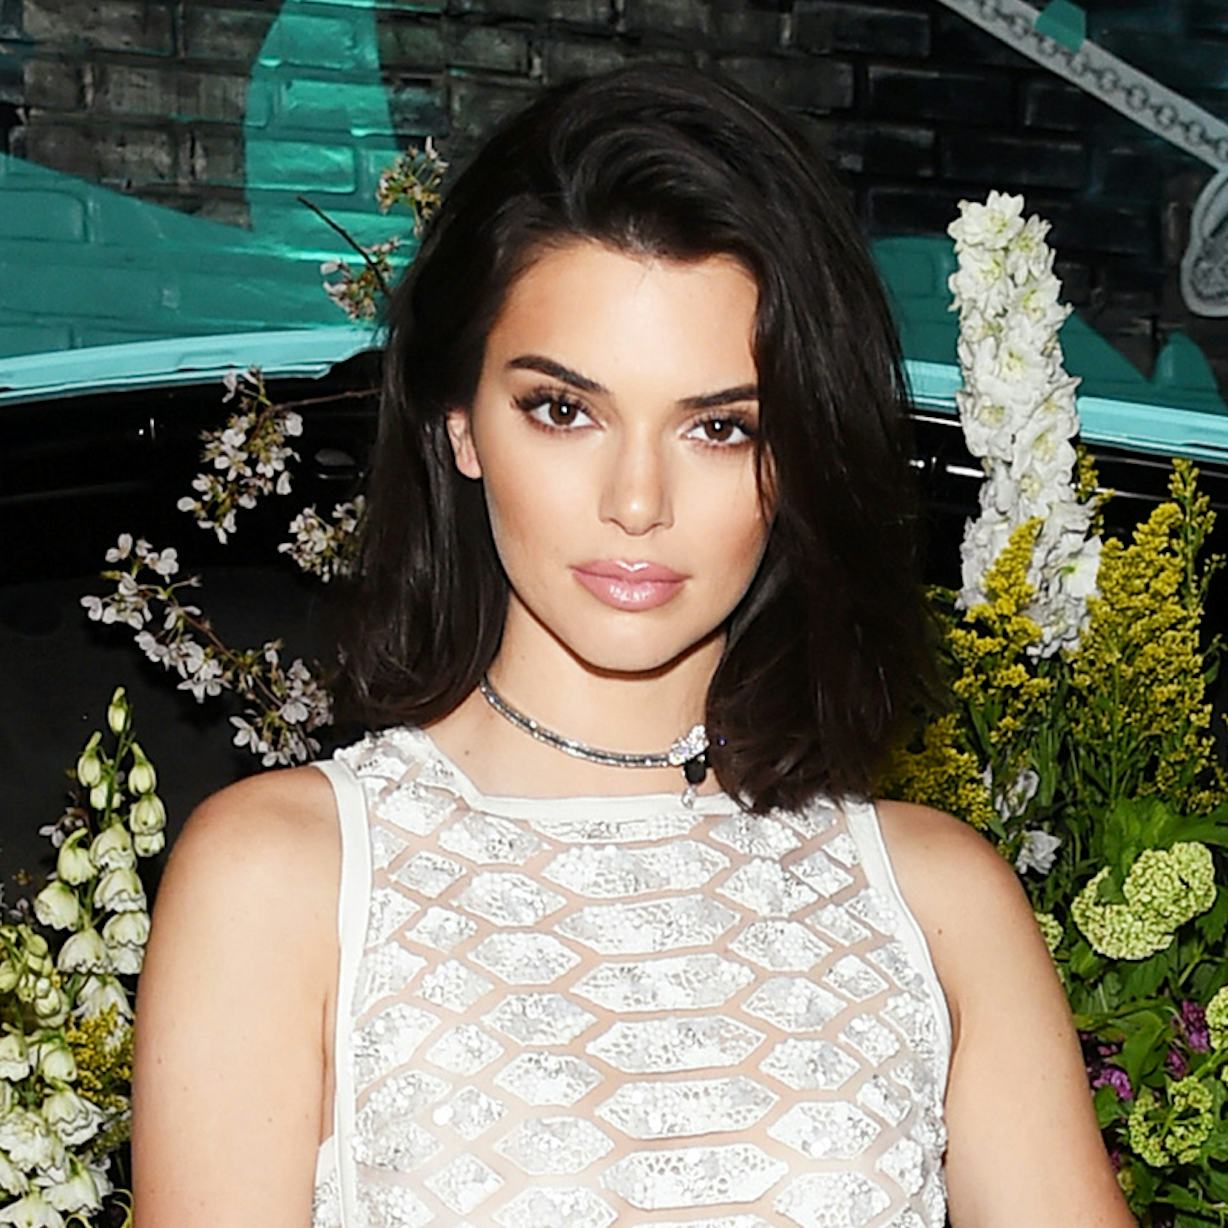 Kendall Jenner’s Shoes Will Make Your Legs Look A Mile Long